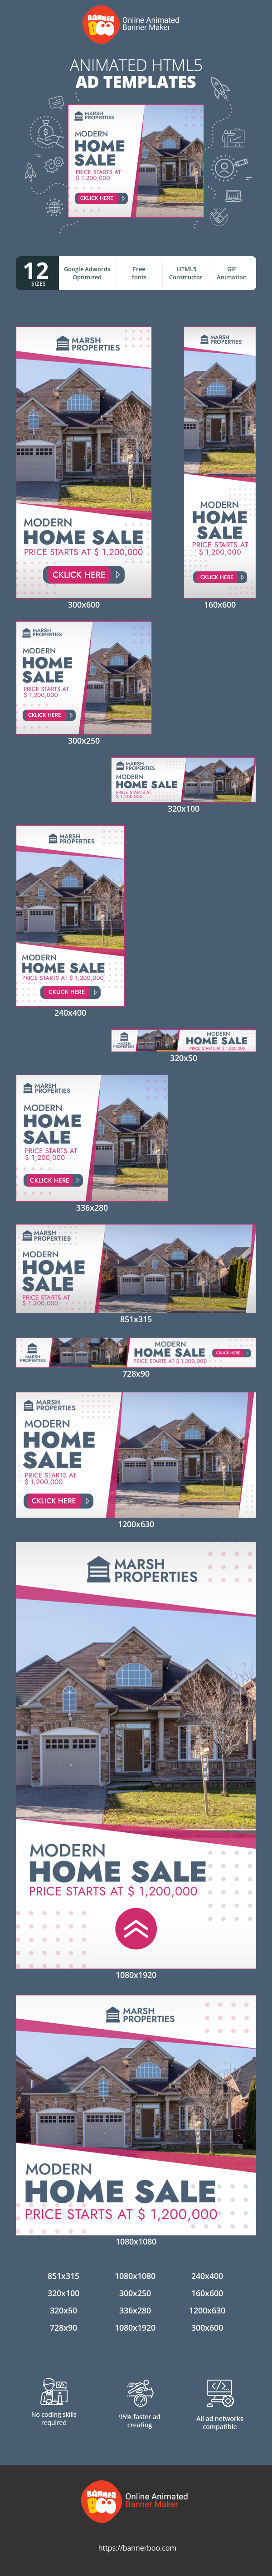 Banner ad template — Modern Home Sale — Price Starts At $ 1,200,000